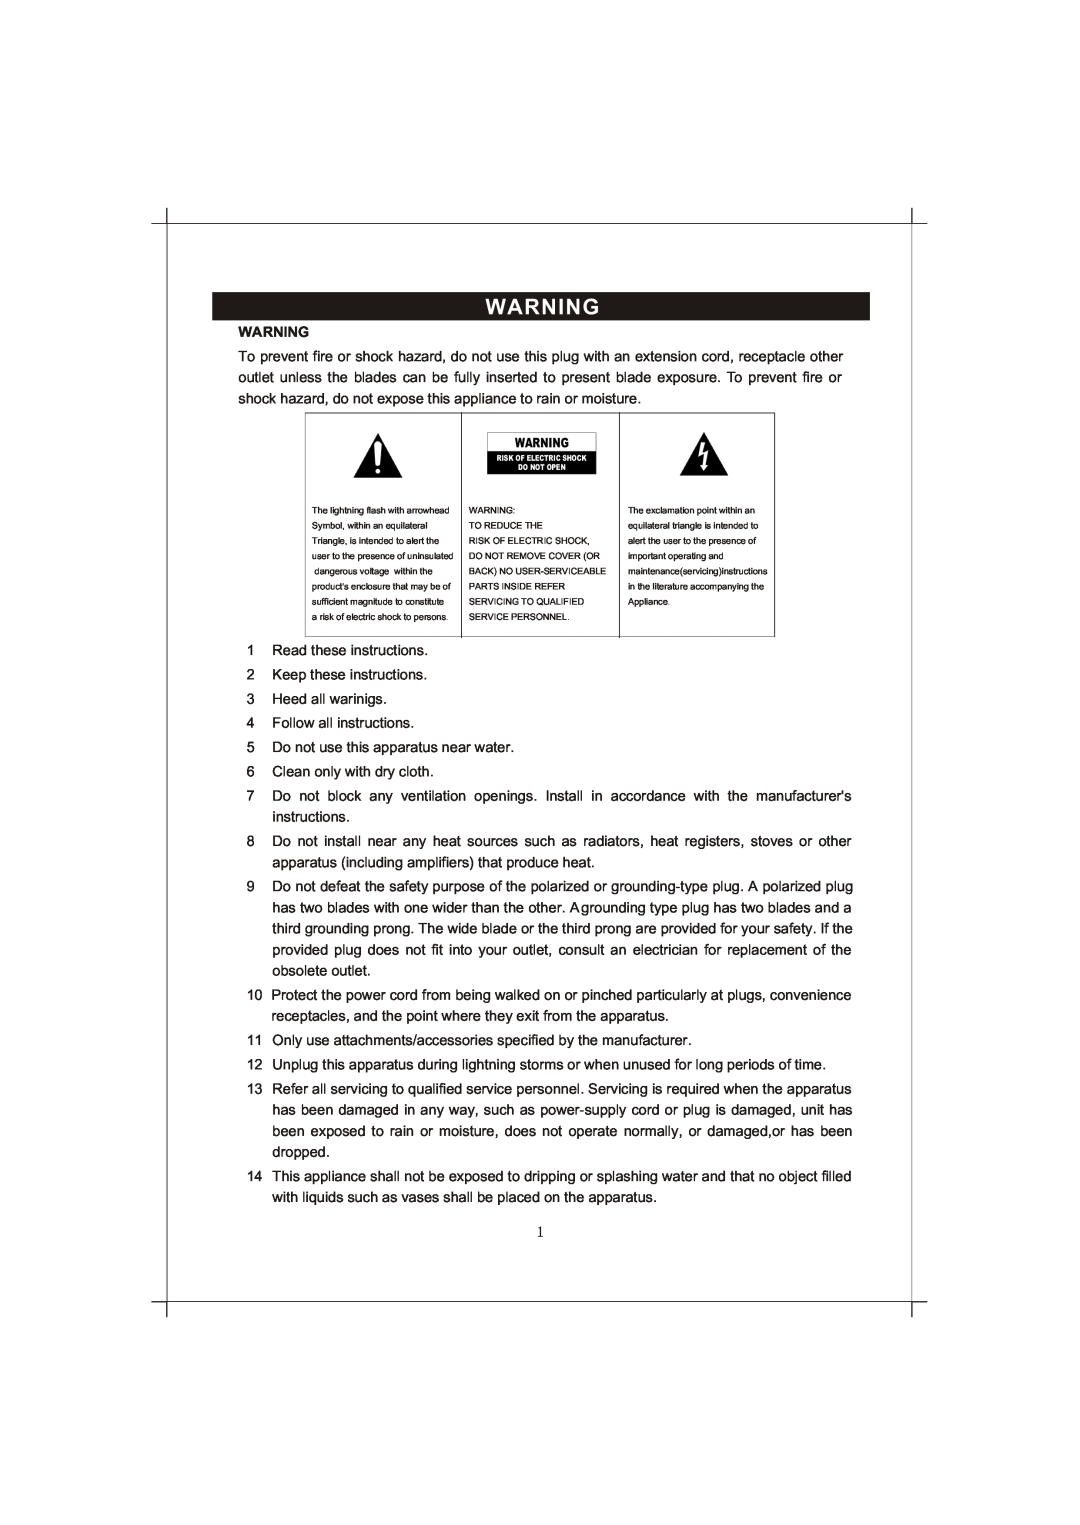 Curtis RCD856 manual 1Read these instructions 2Keep these instructions 